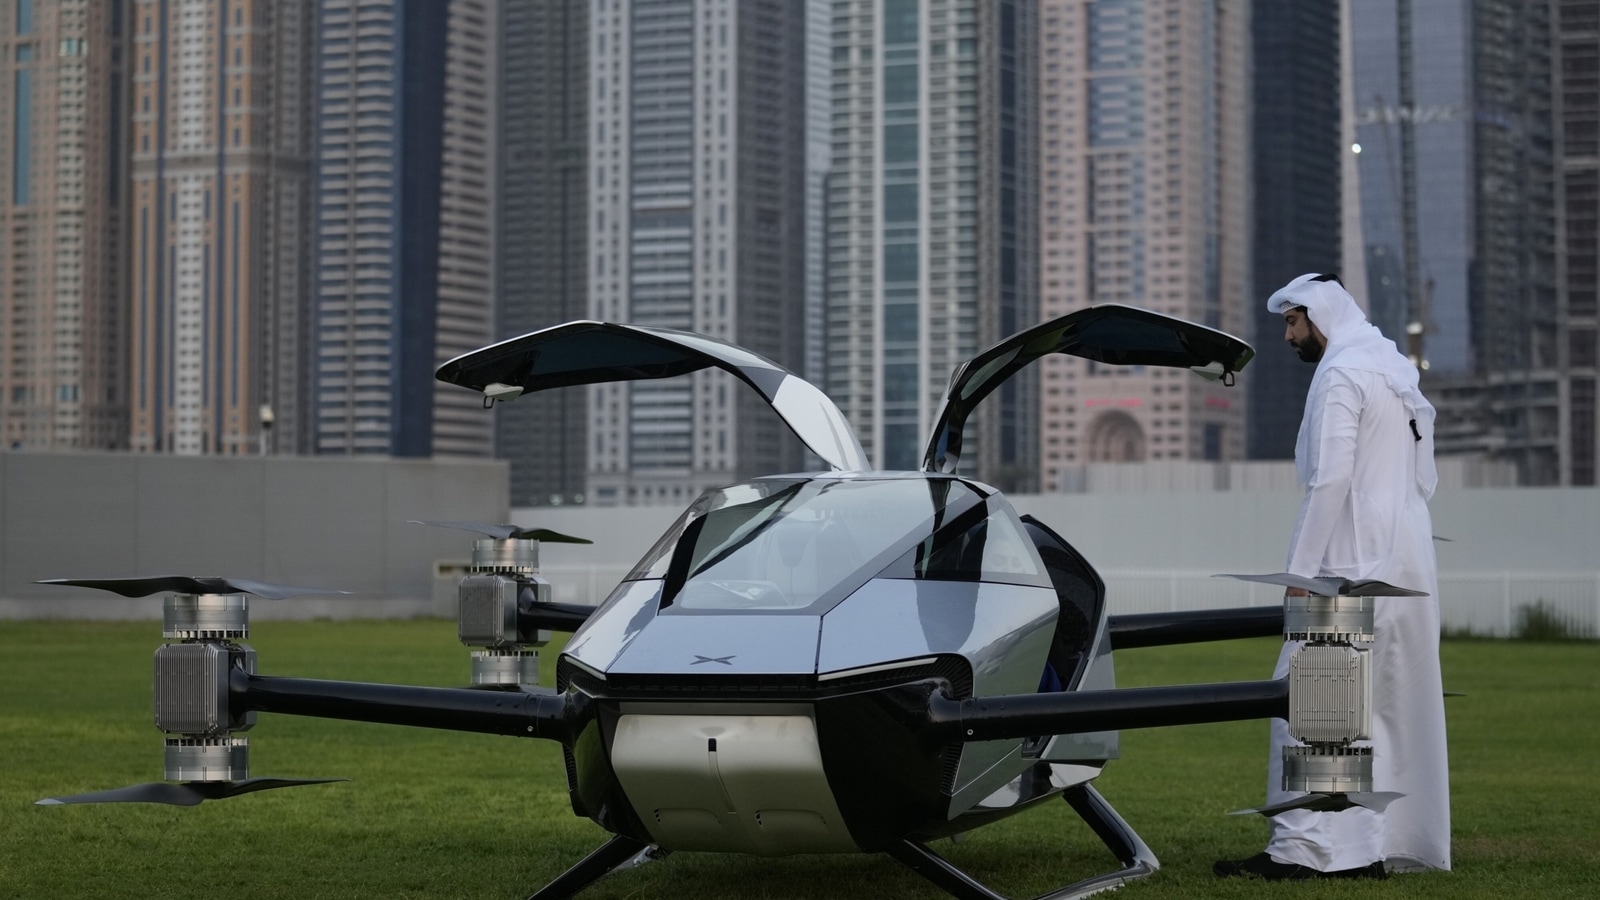 Glimpse of future? Chinese firm tests flying taxi in Dubai - Hindustan Times